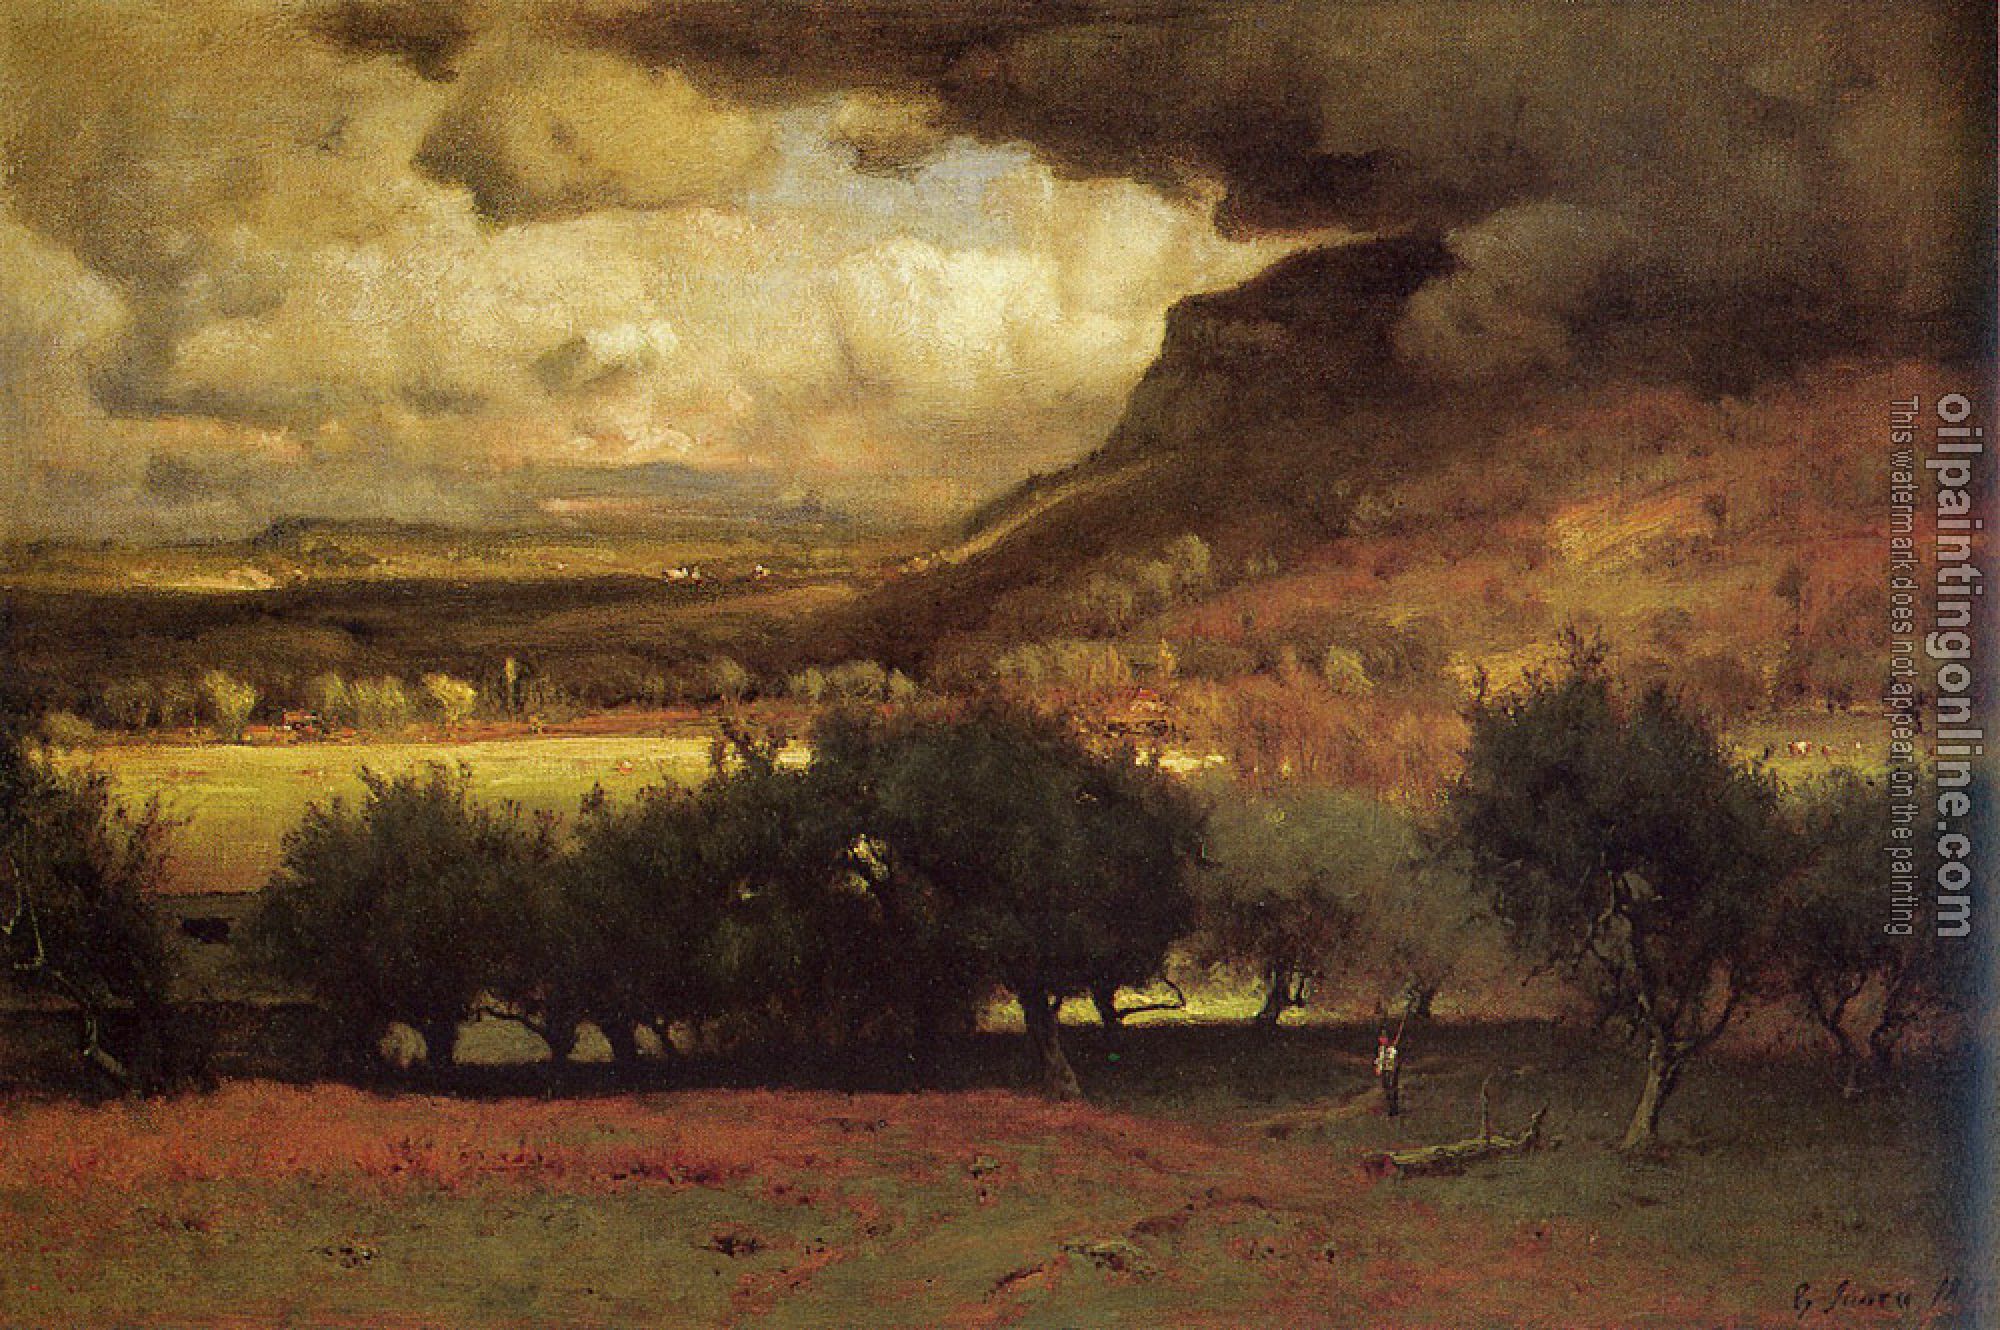 George Inness - The Coming Storm